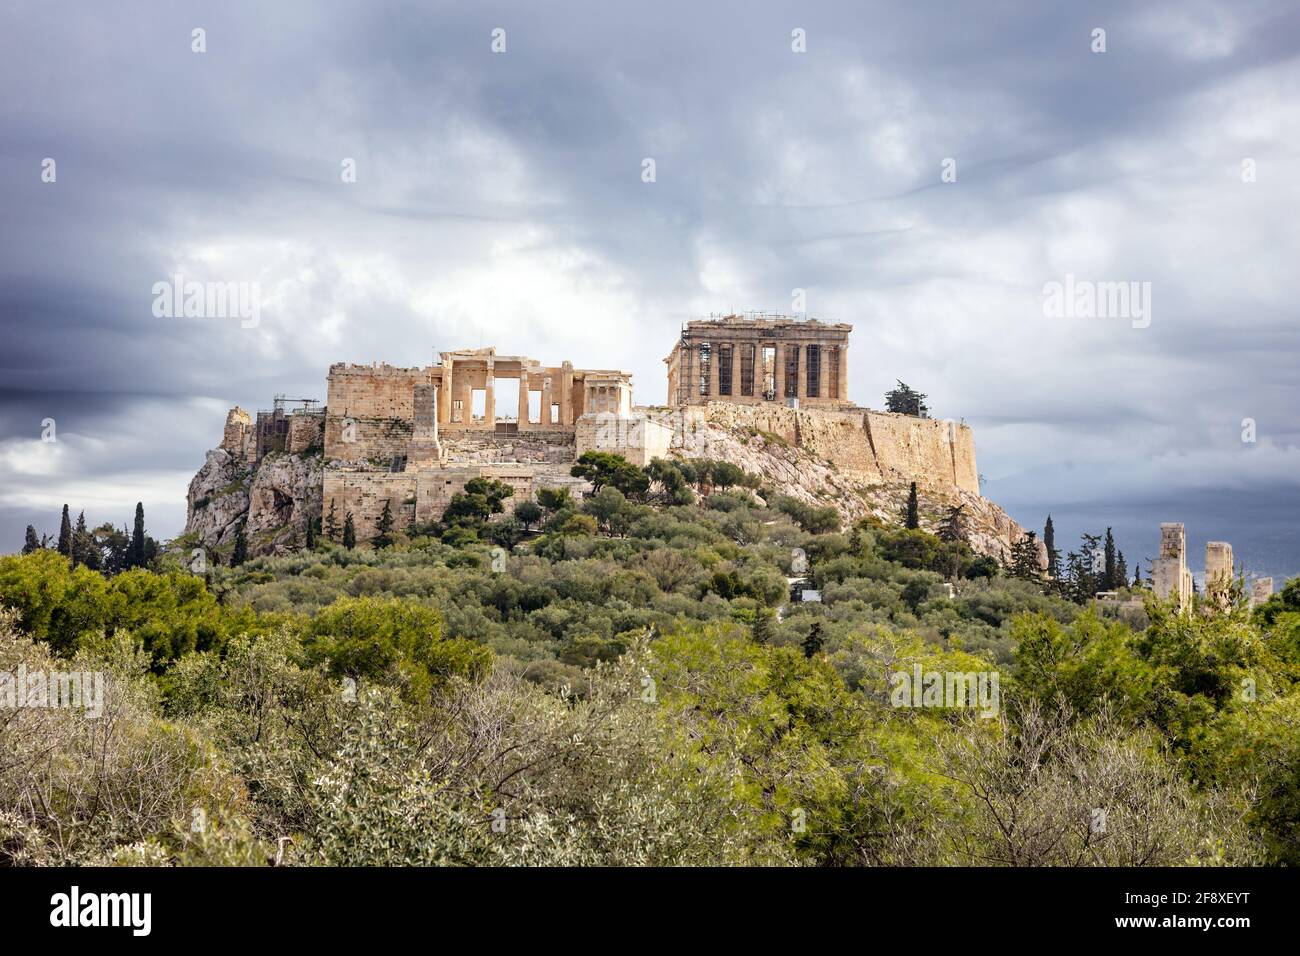 Athens, Greece. Acropolis and Parthenon temple, top landmark. Scenic view of ancient Greece remains from Philopappos Hill, cloudy sky background. Stock Photo